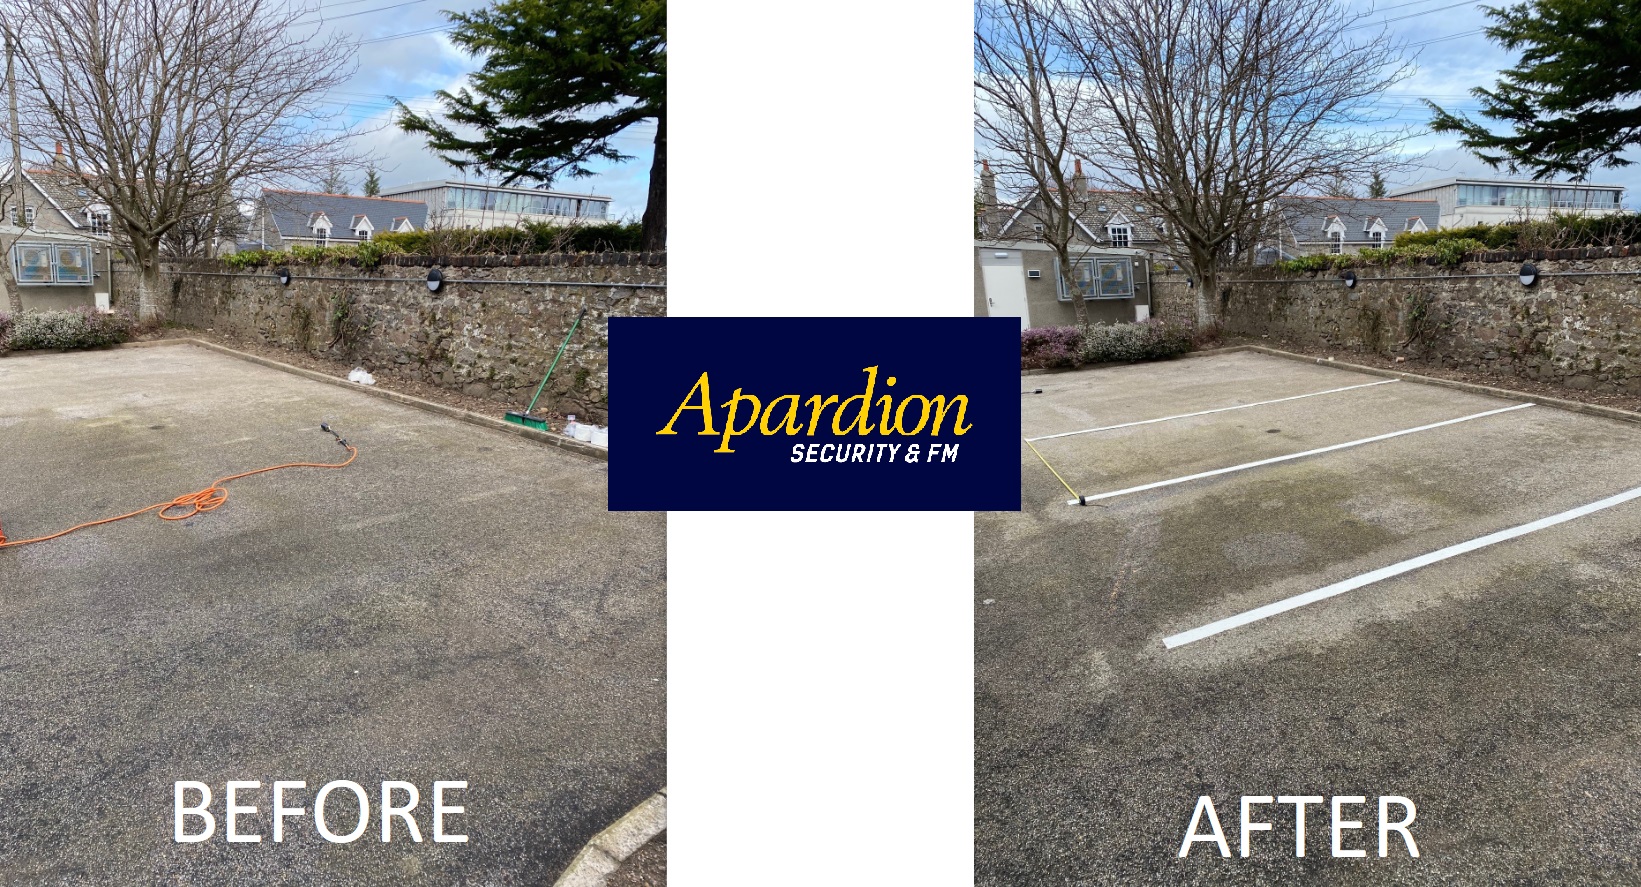 Road markings before and after